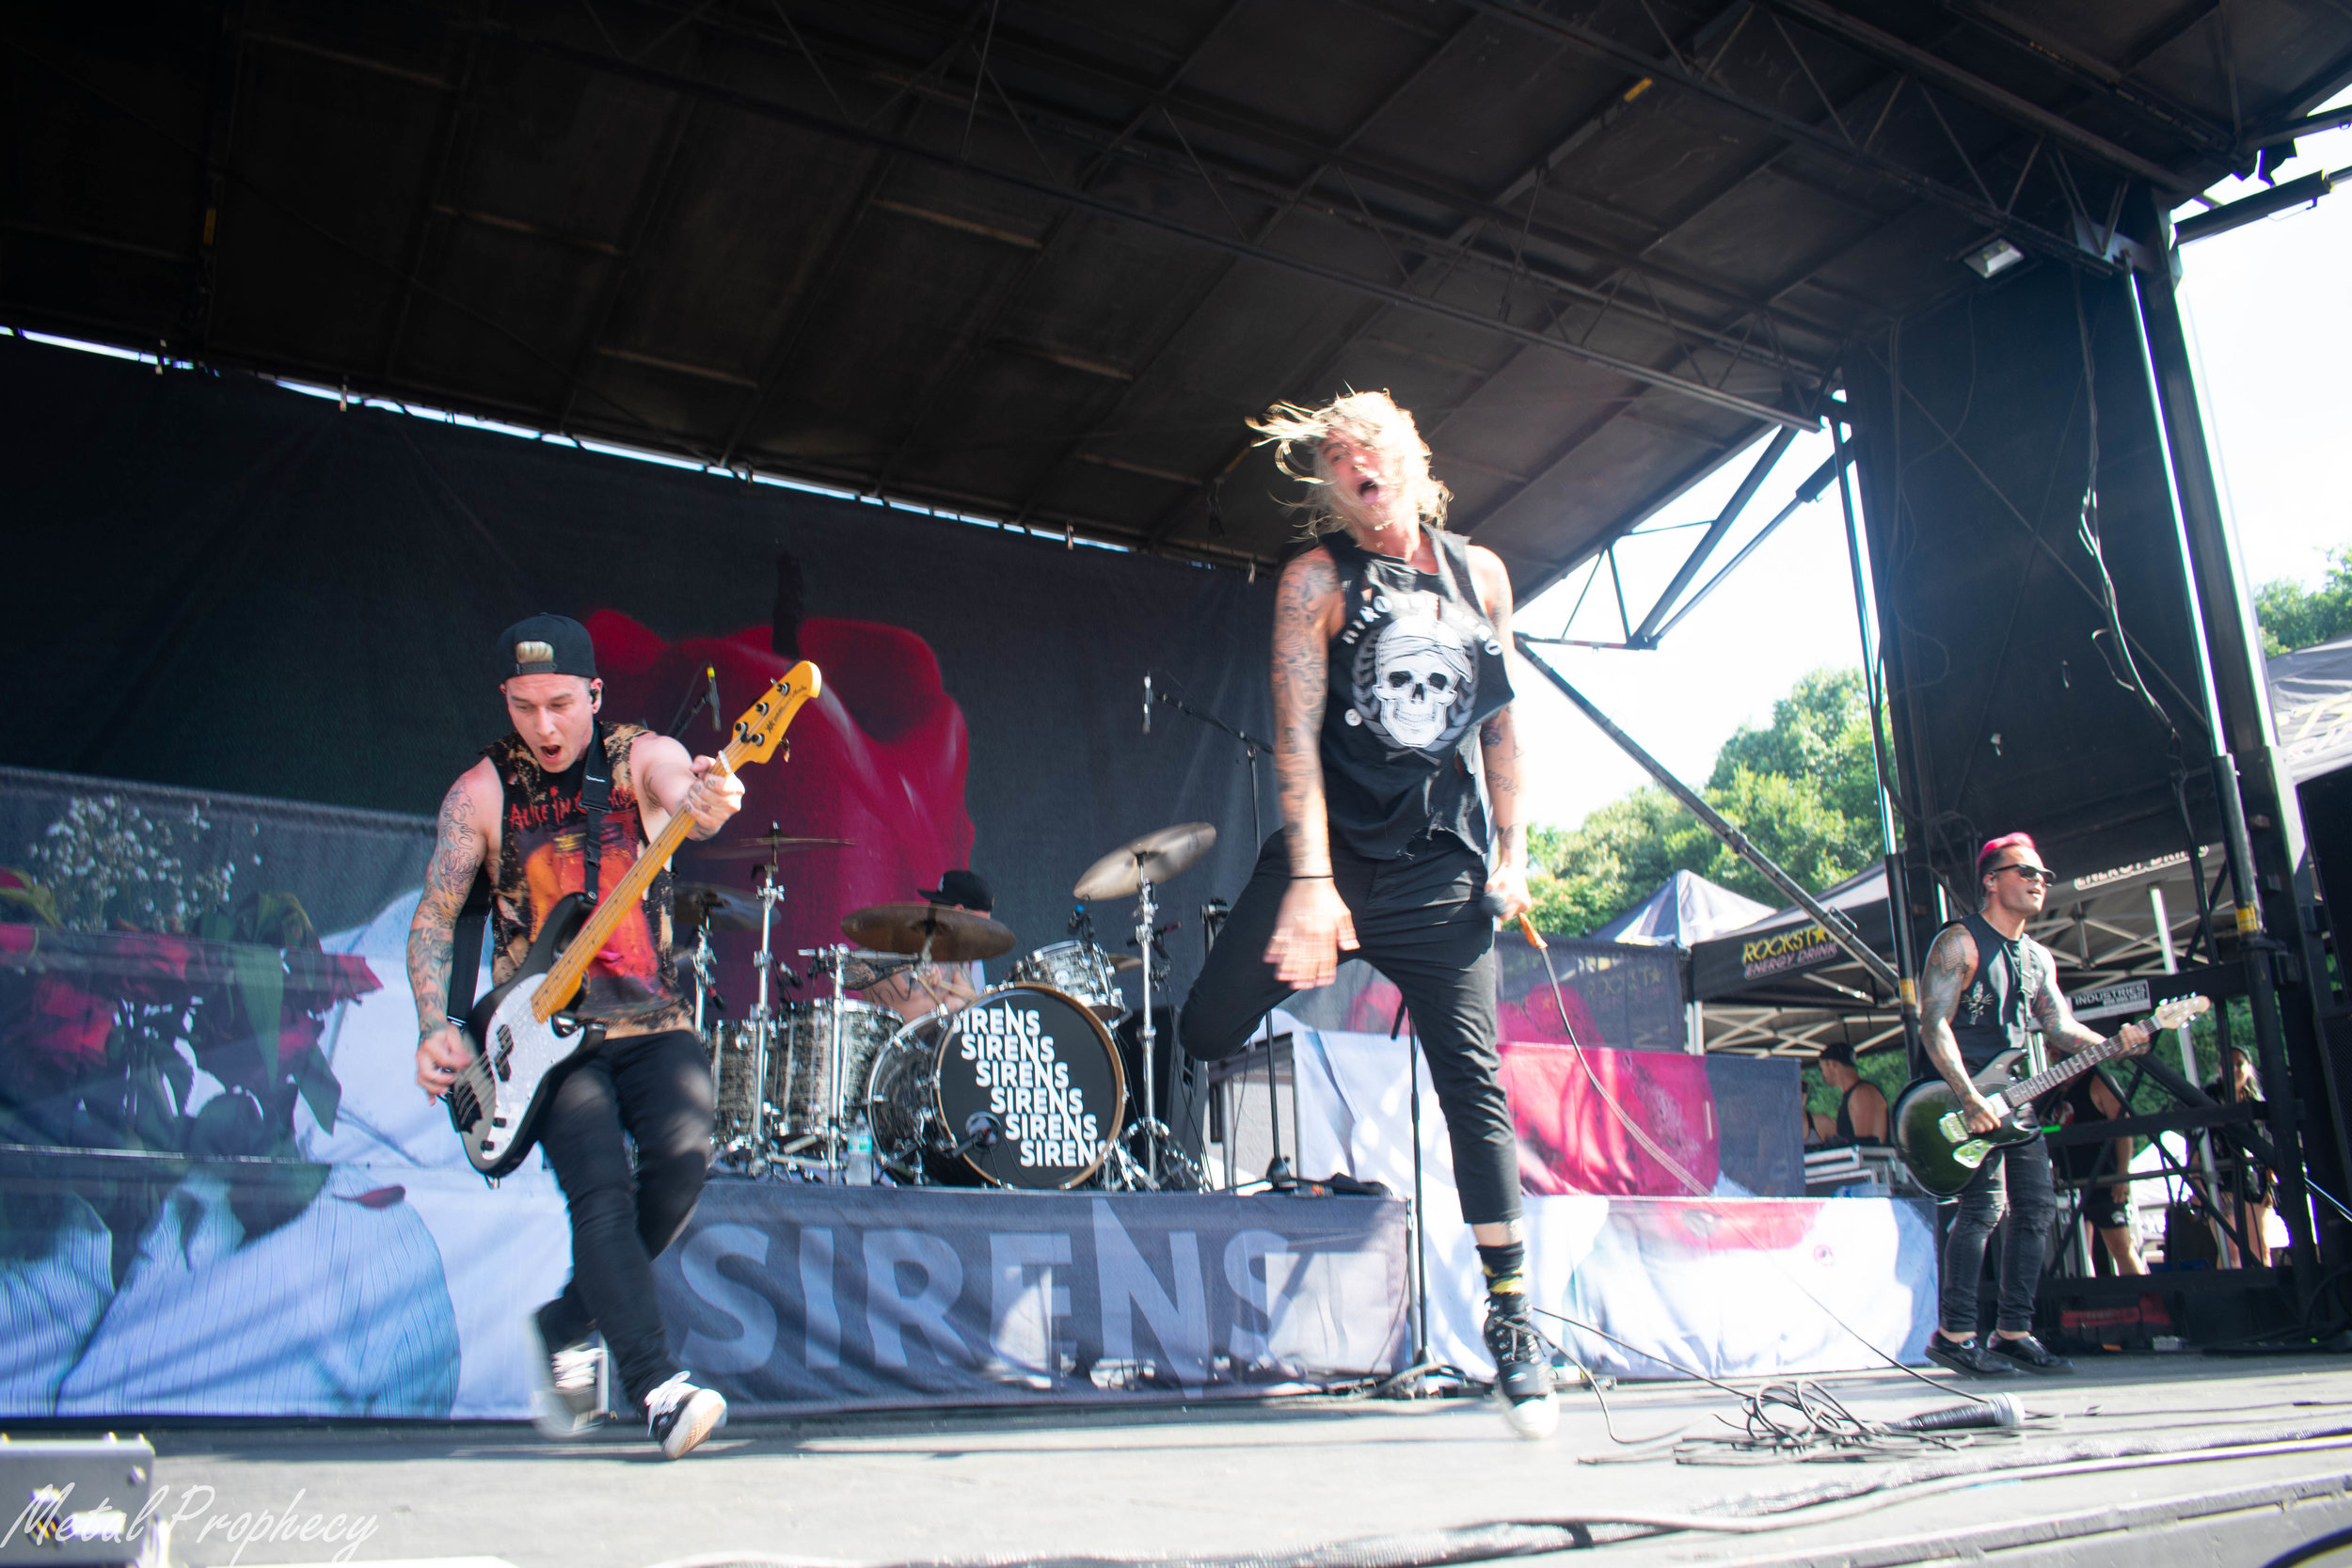 Sleeping With Sirens at Rockstar Energy Disrupt Festival